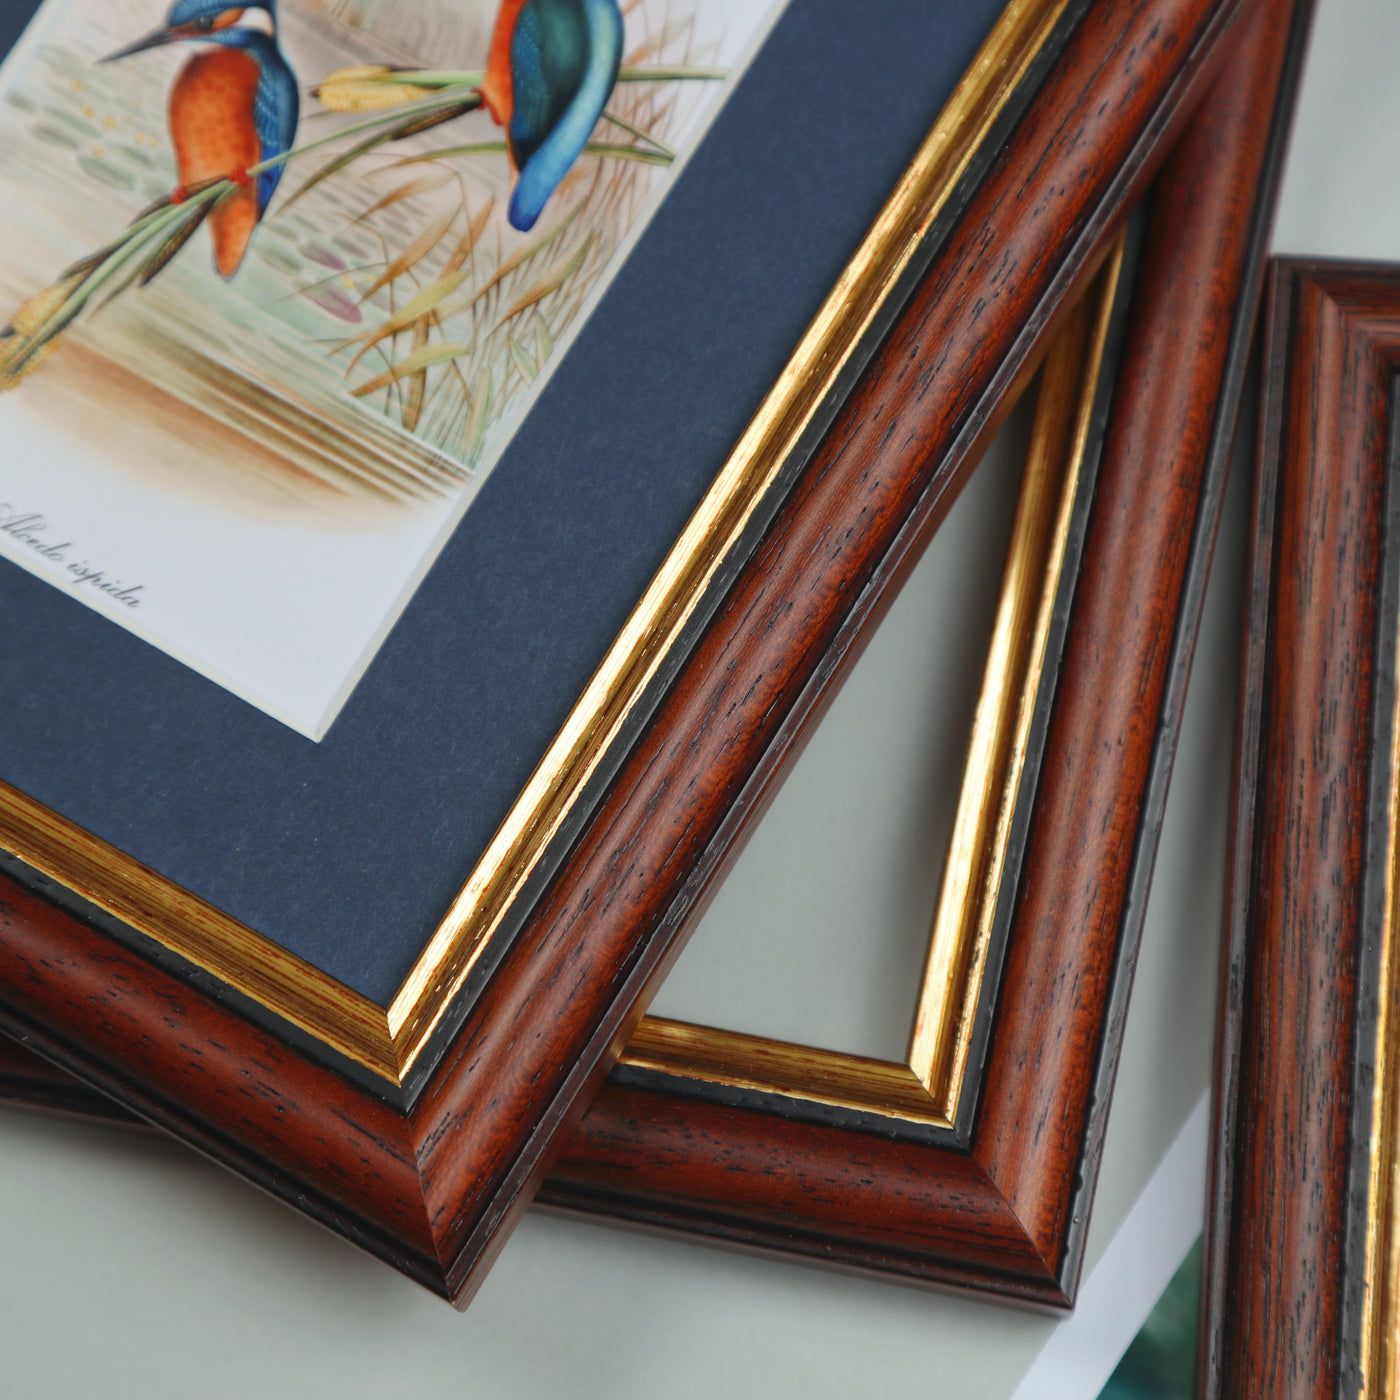 6x4 Brown & Gold Picture Frame with a 3.5x2.5 Mount